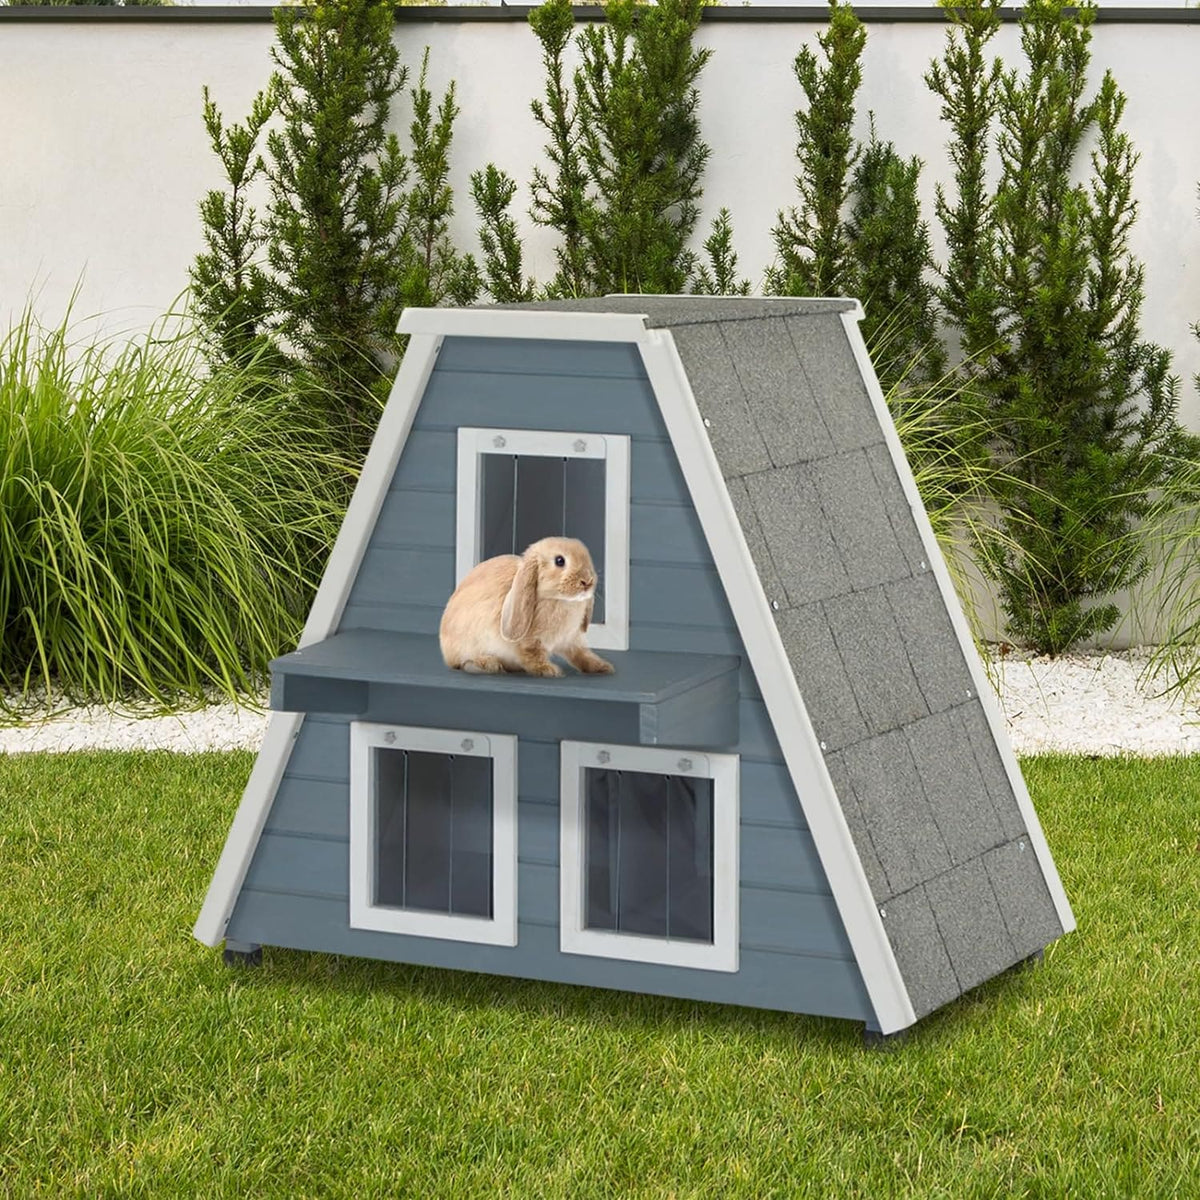 Petsfit Outdoor Cat House Weatherproof, Outside Feral Cat House with Escape Door,Outdoor Indoor Pet House for Small Animal Grey